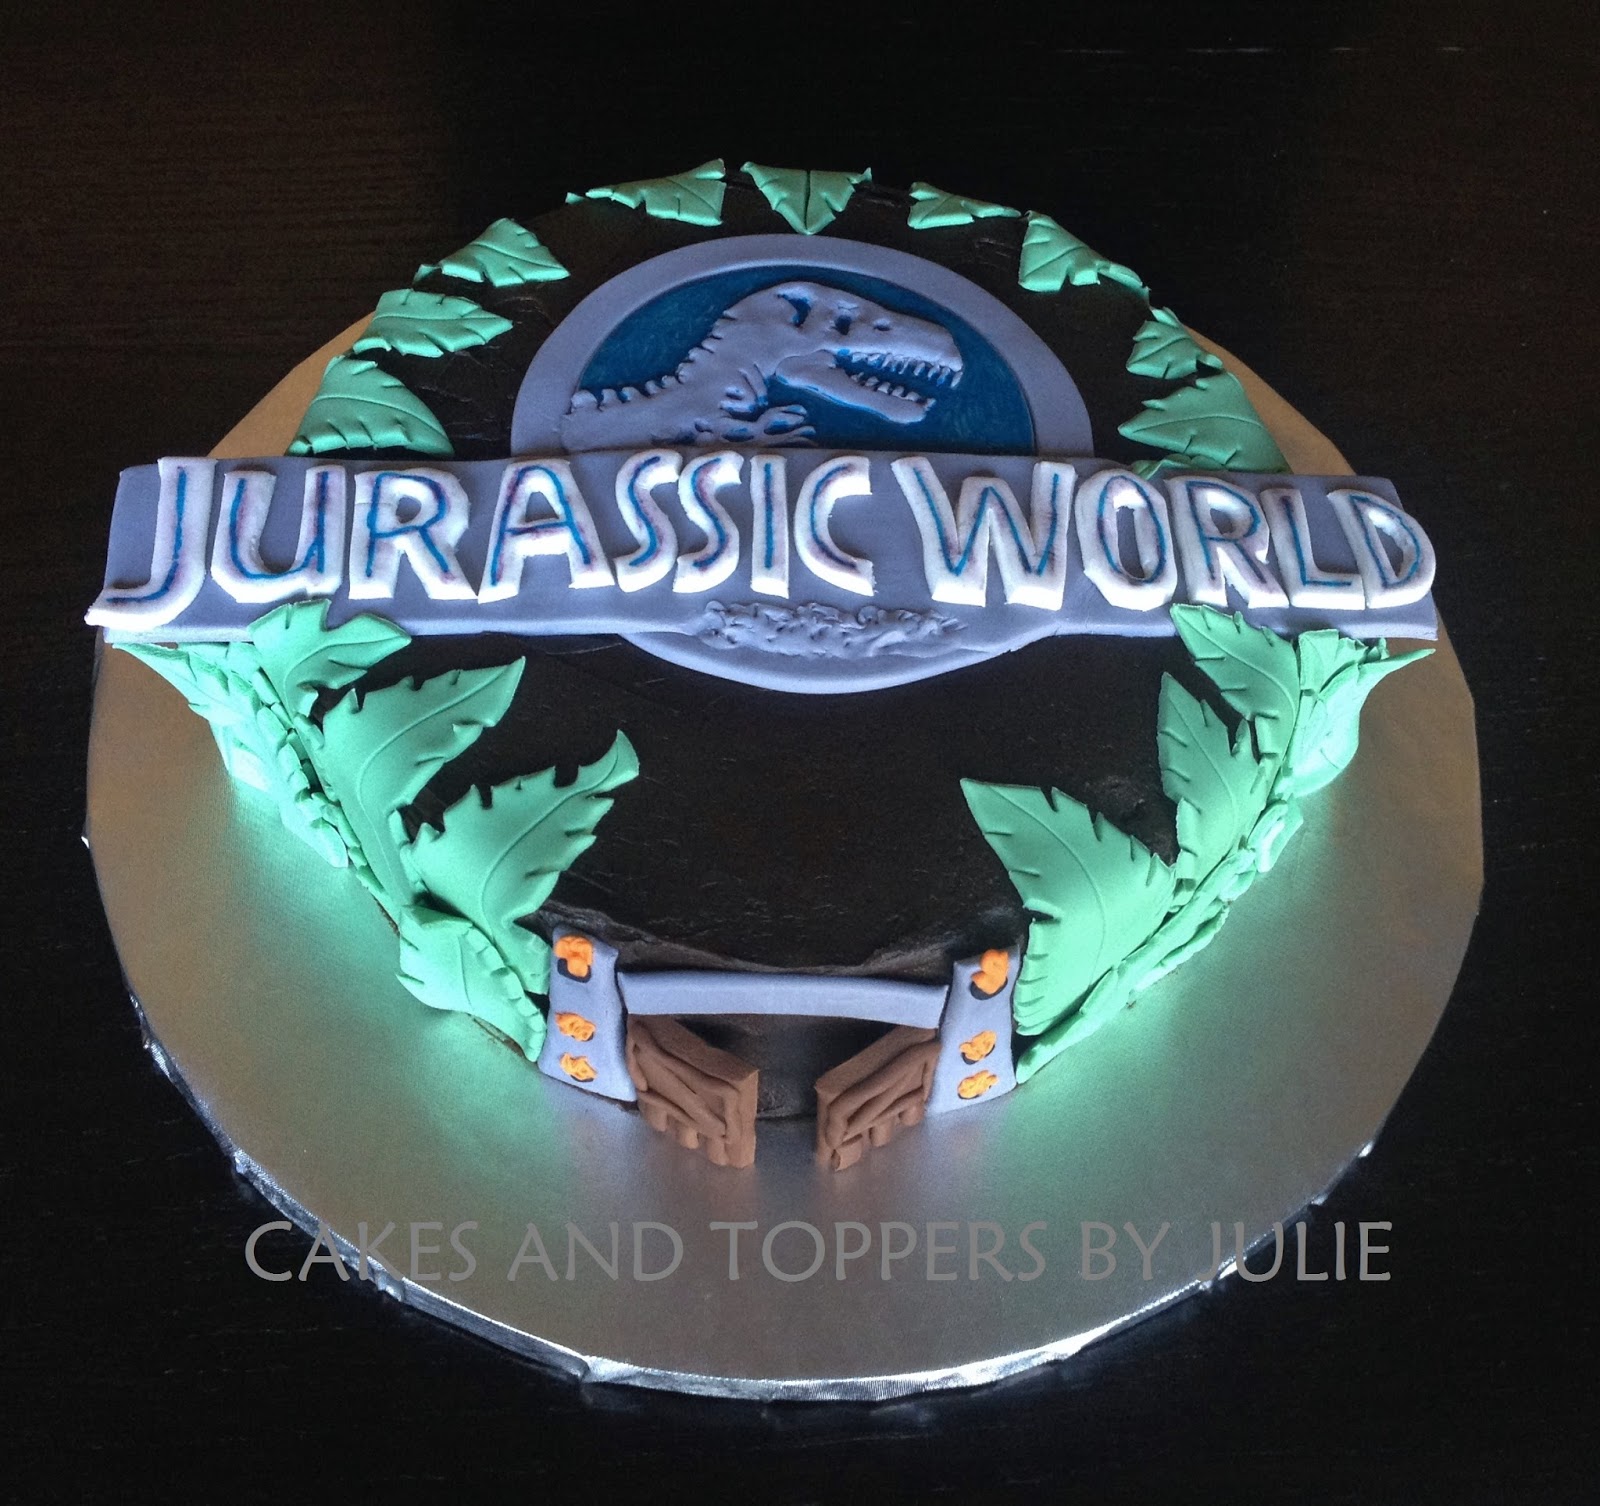 Custom Cakes by Julie: Jurassic World Cake and Toppers